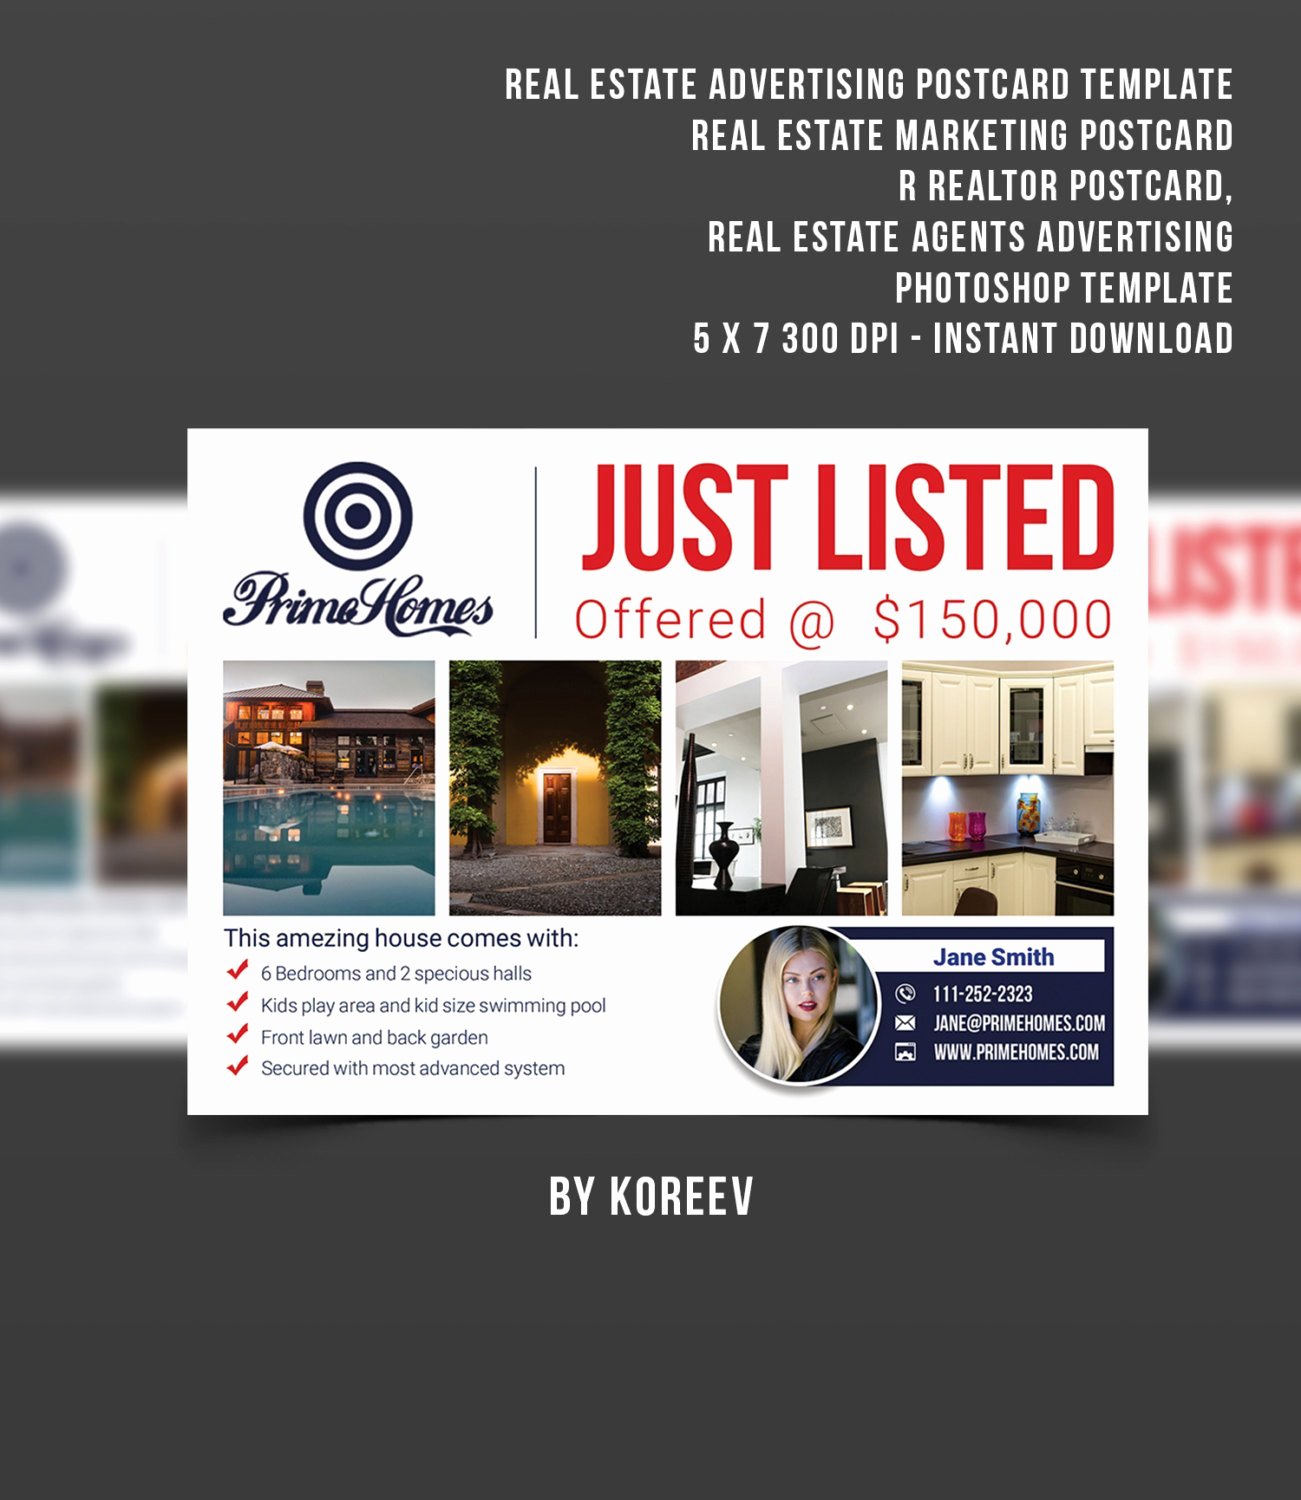 Real Estate Postcard Template Best Of Real Estate Advertising Postcard Template Real Estate